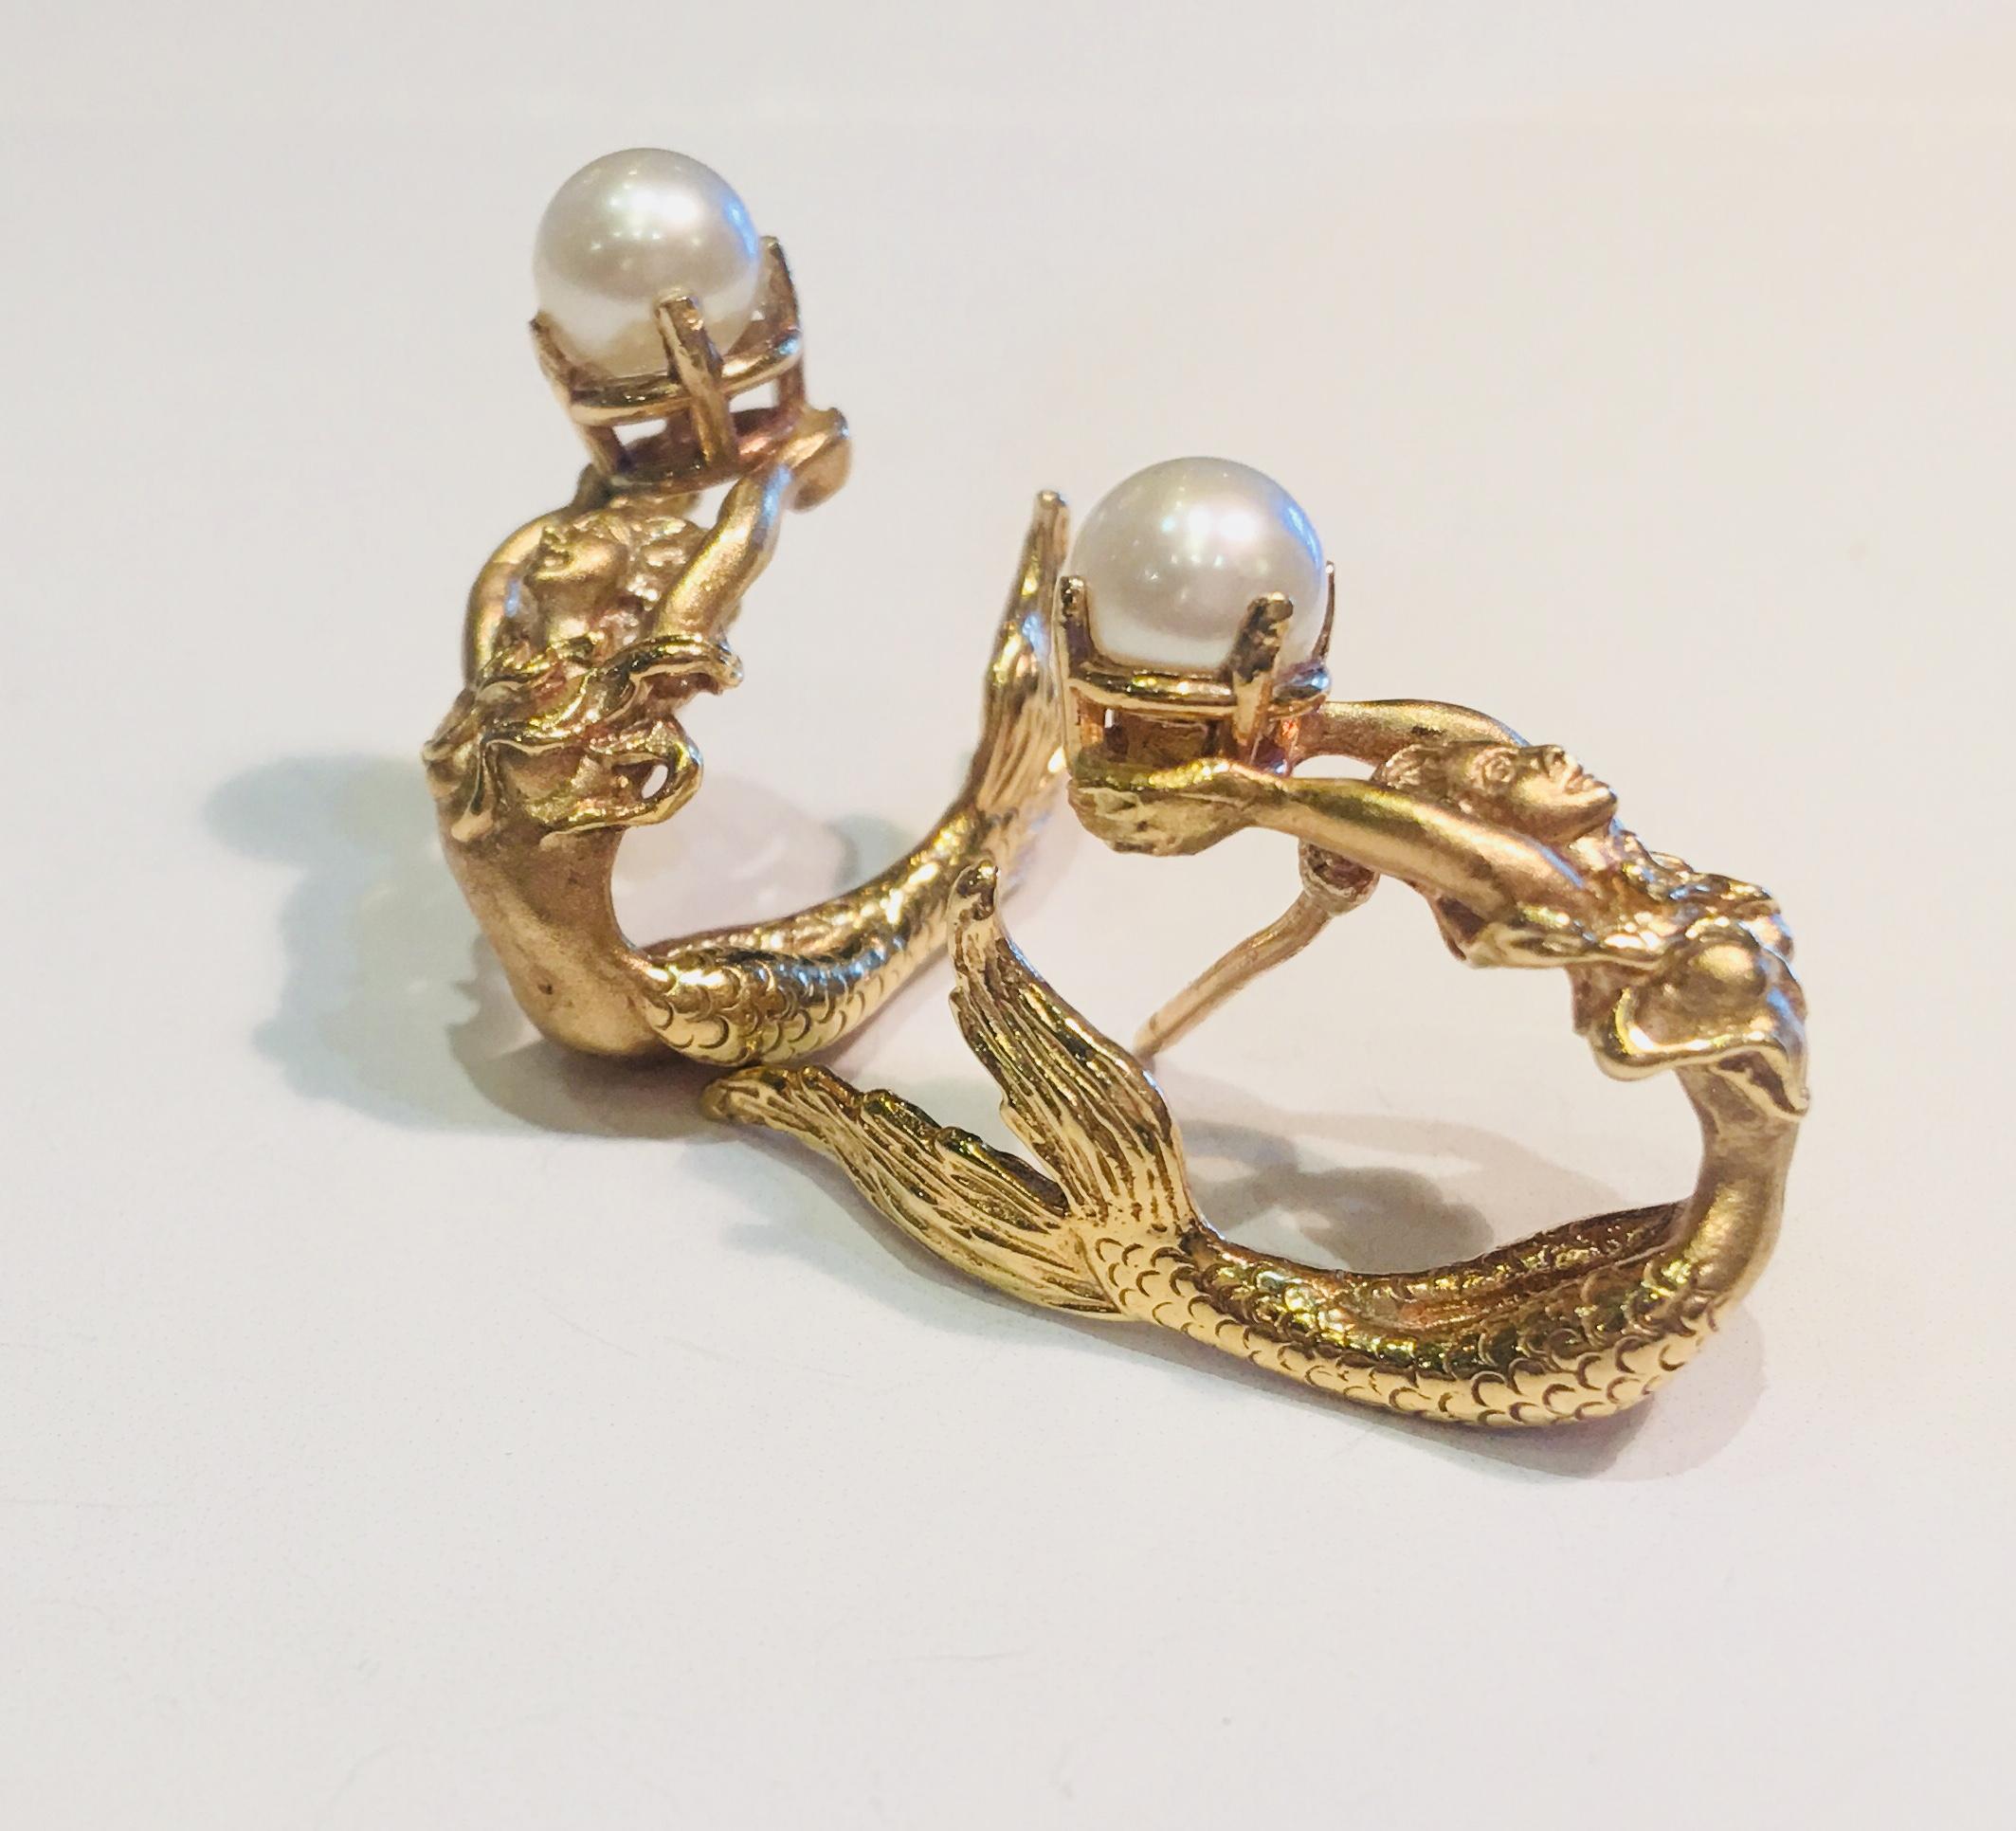 14 karat yellow gold earrings are a pair of beautifully detailed, 3 dimensional mermaids holding one prong set lustrous white pearl, with graceful tails that wrap around the ears.

Pearls measure 5.65 mm each.   Earrings measure 26.17 mm x 21 mm x